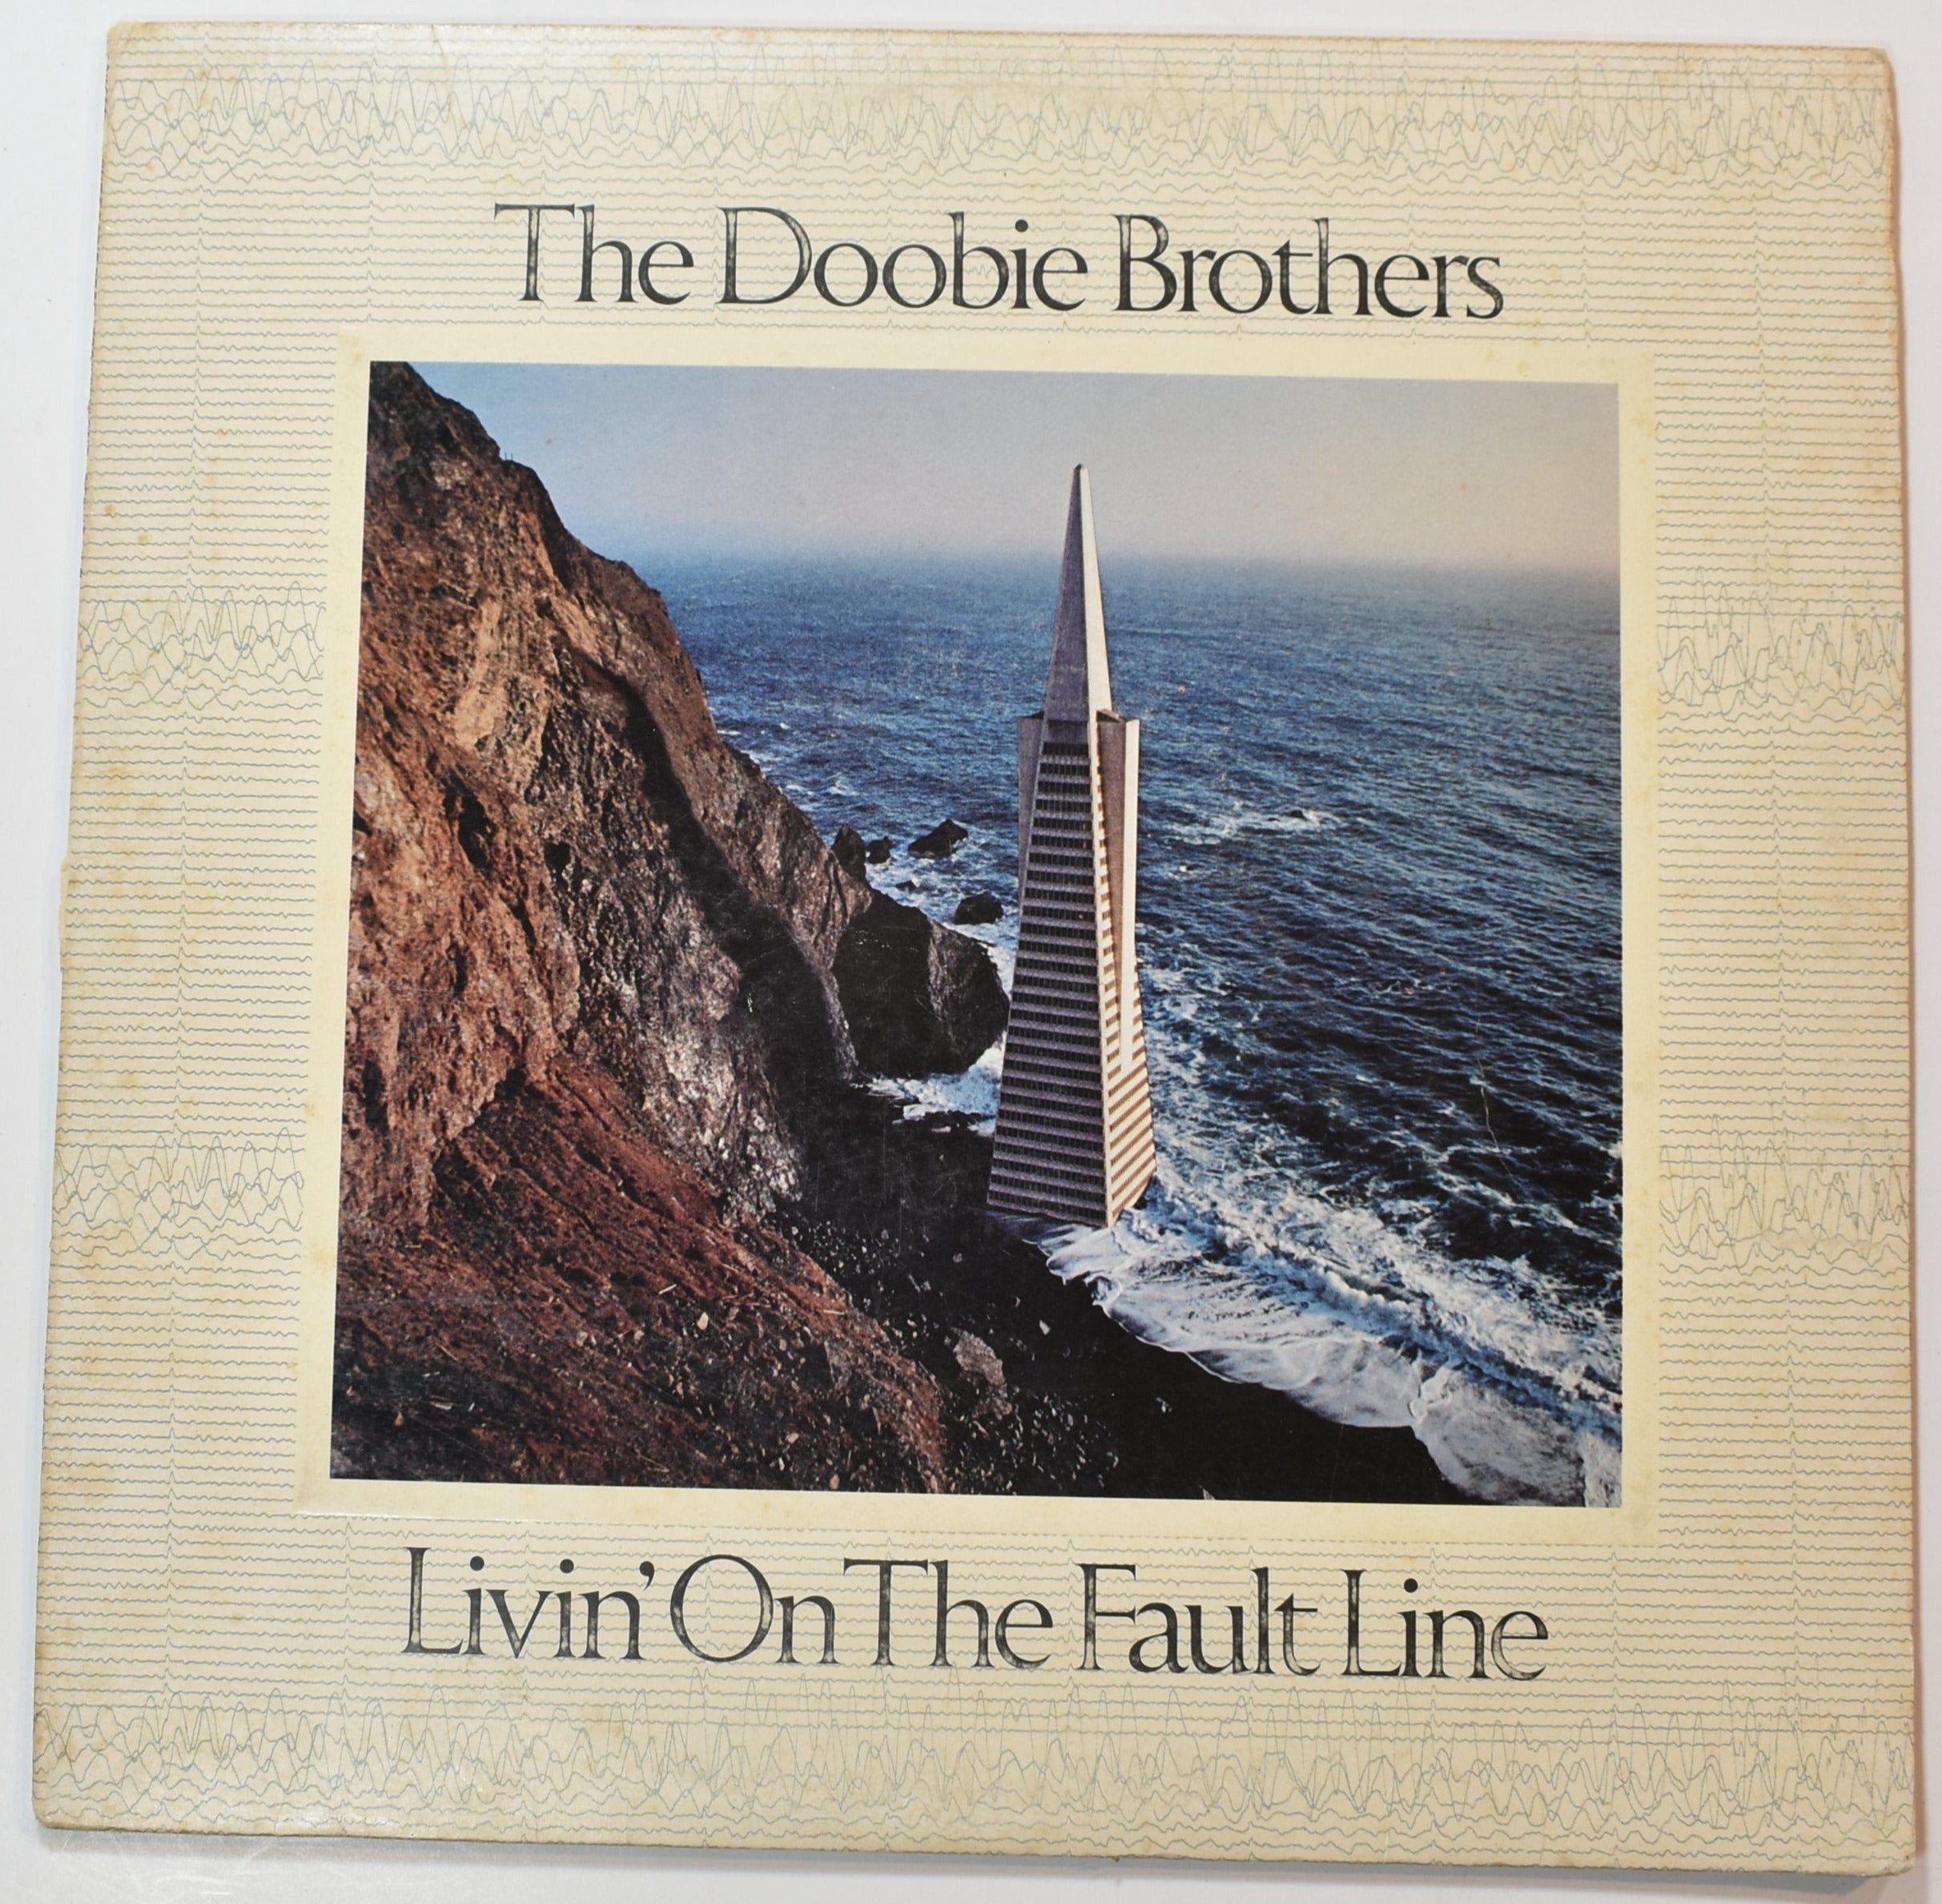 Vinyl Music Record The Doobie brothers Livin on the fault line